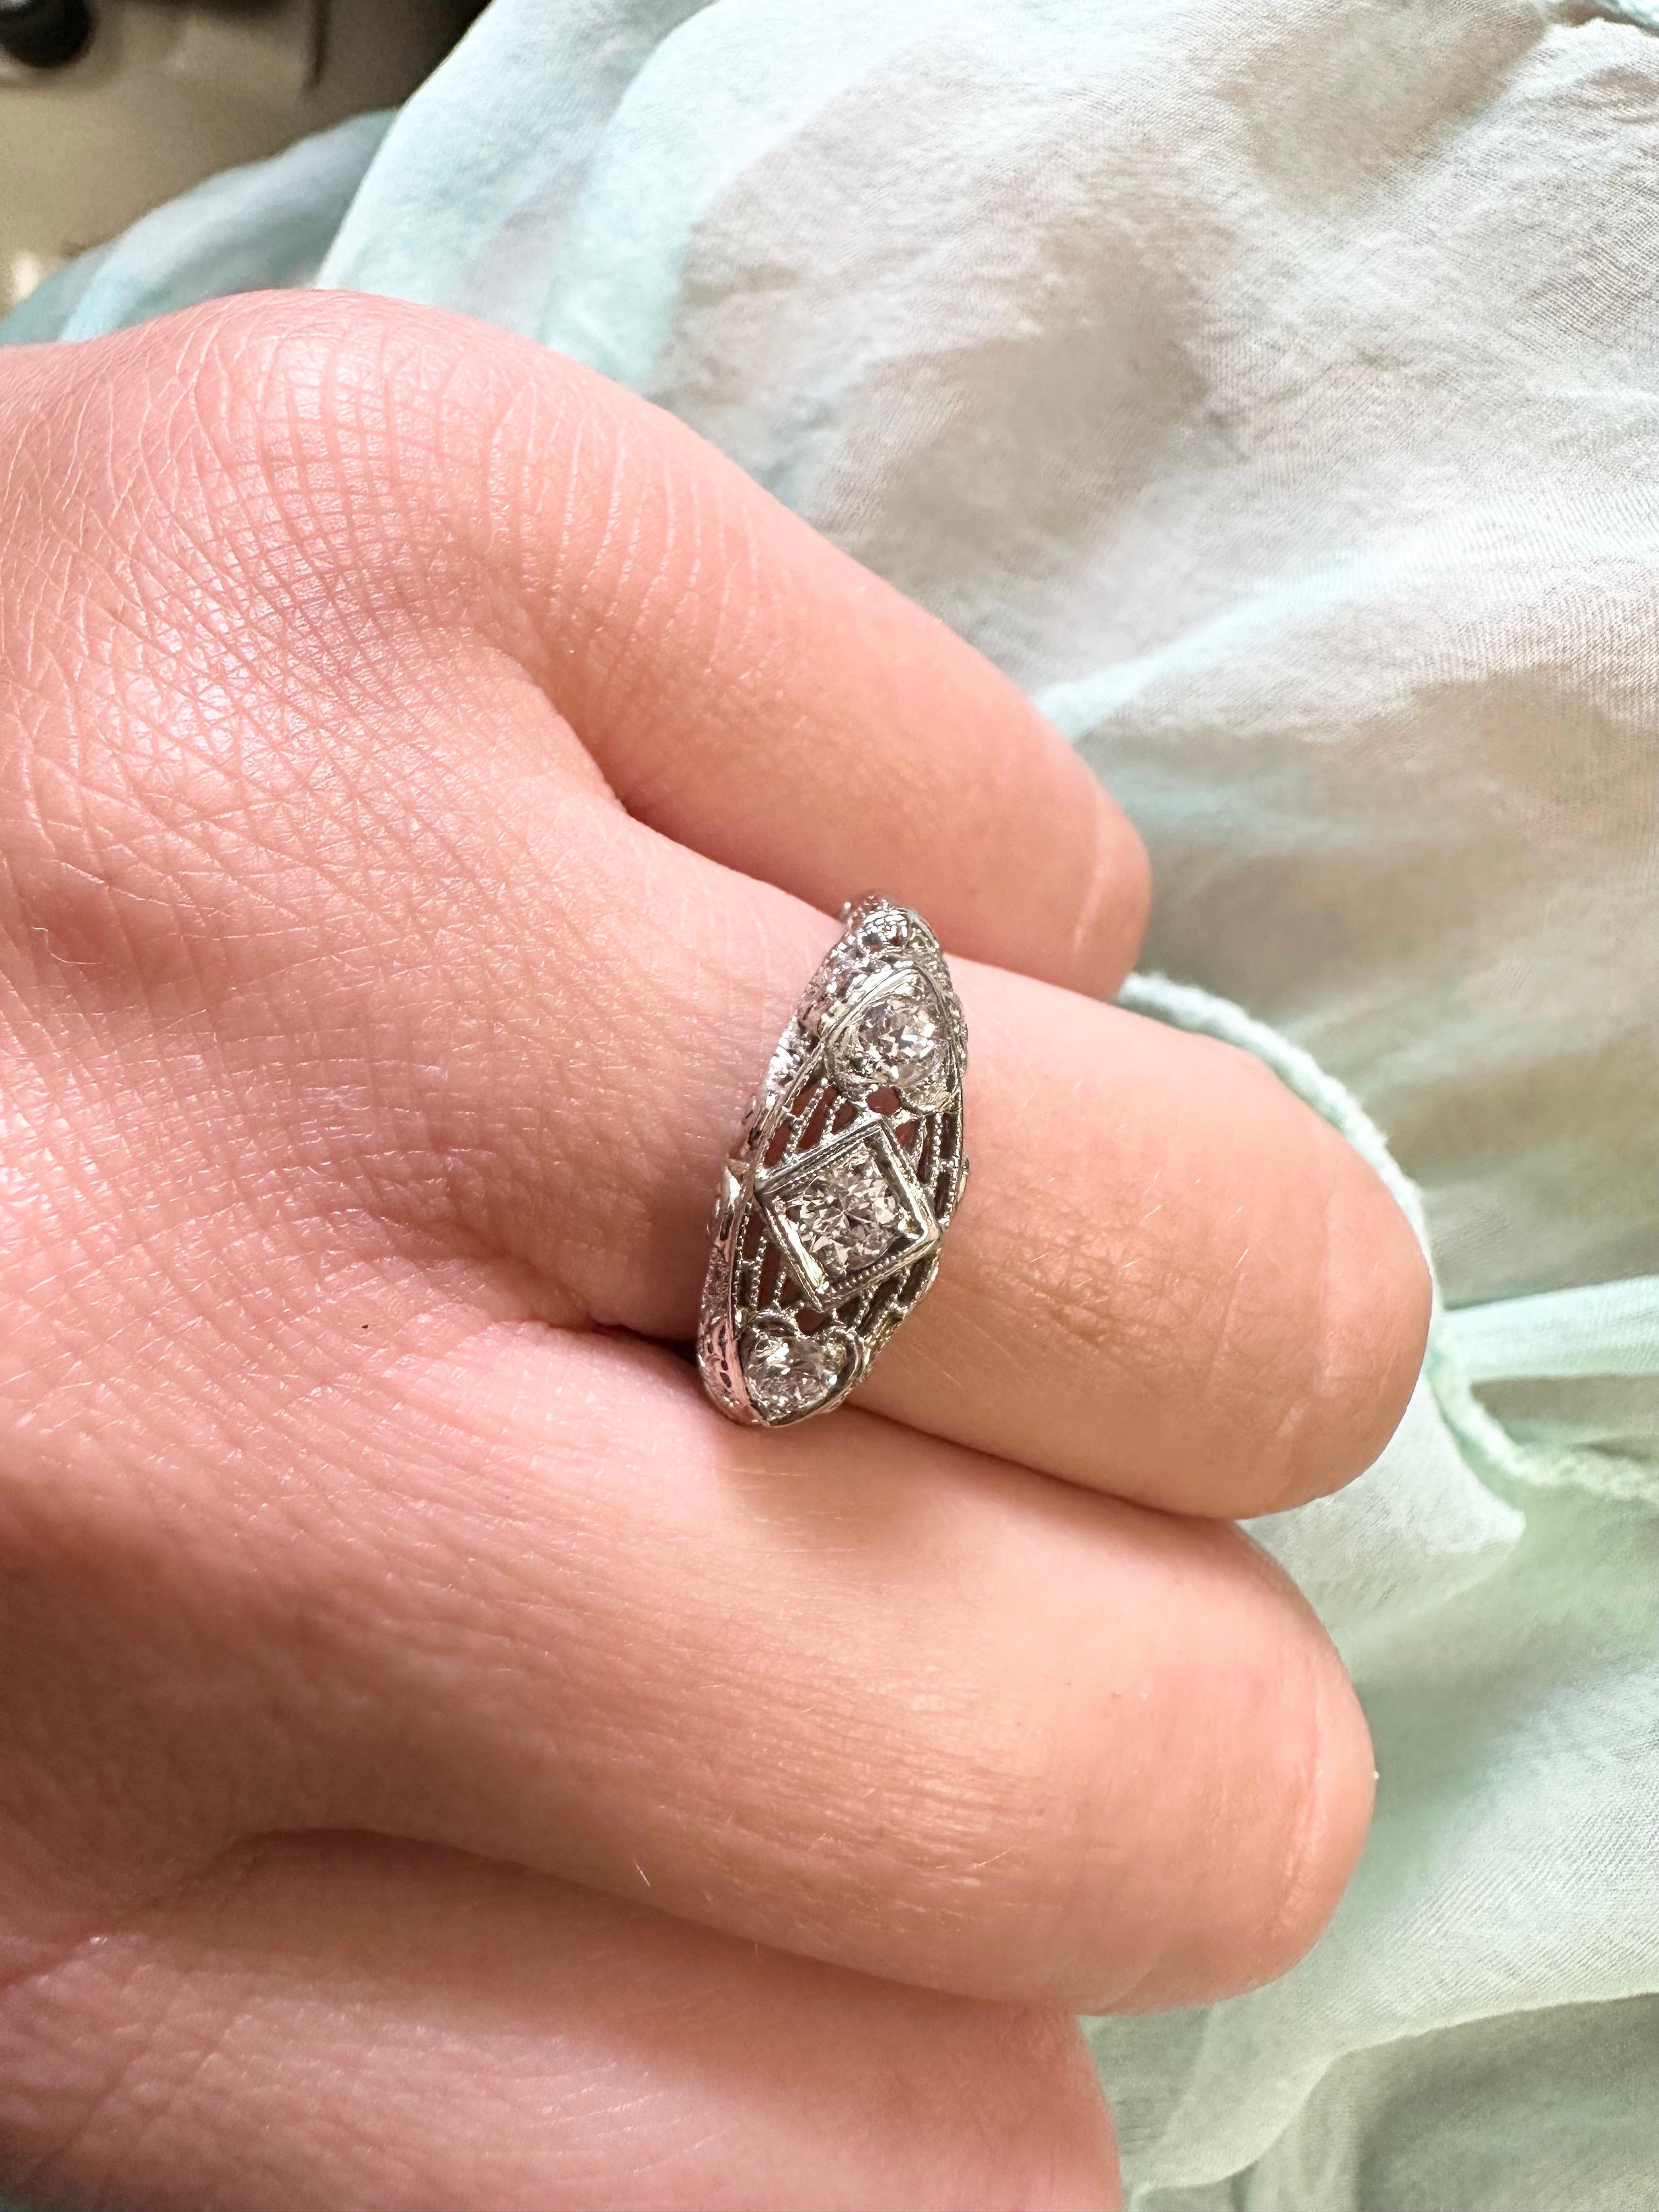 Three stone antique diamond ring in 18kt gold.

Natural Center Diamond(s): 
Color: F-G
Cut:Round
Carat: 0.25ct
Clarity: SI
Grams:2.9
Item: TNA
Certificate of authenticity comes with purchase

ABOUT US
We are a family-owned business. Our studio in